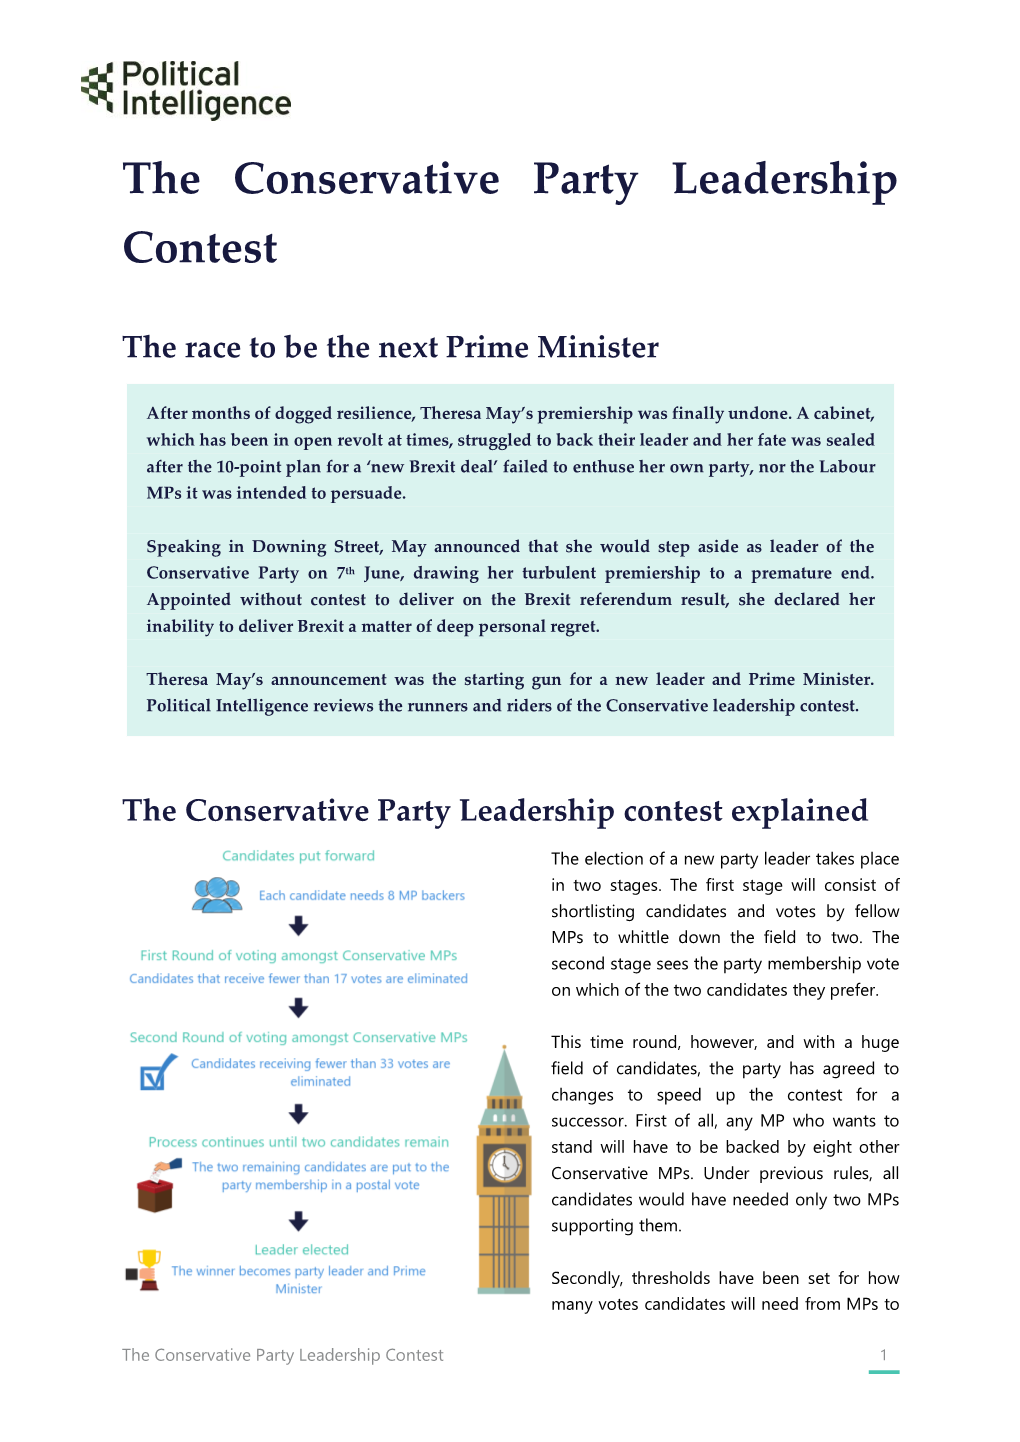 The Conservative Party Leadership Contest